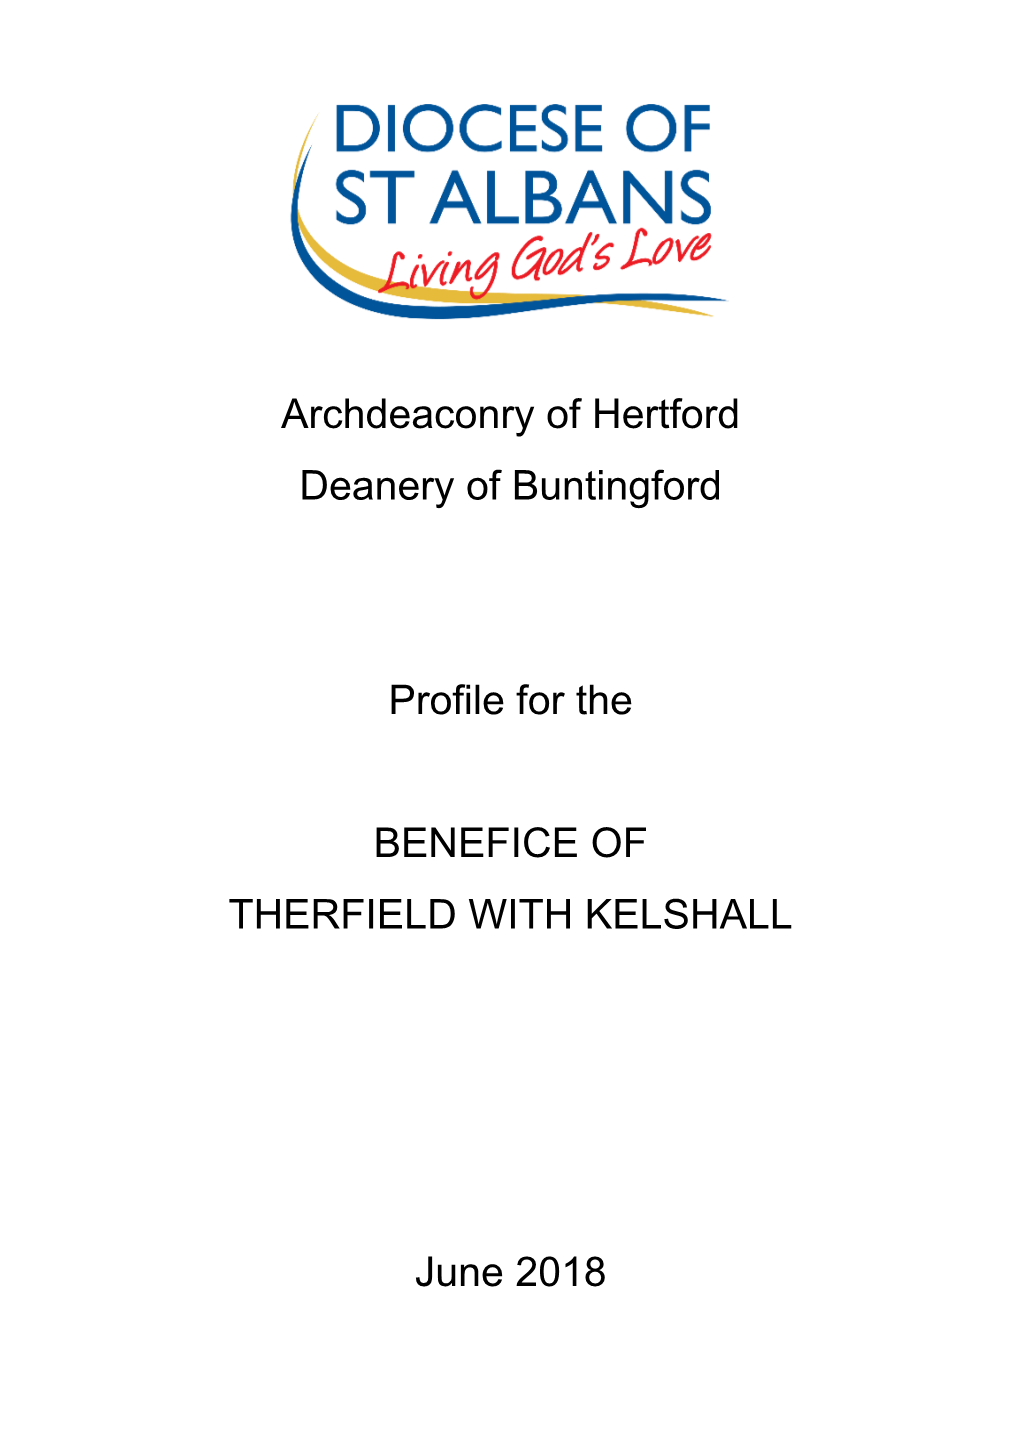 Archdeaconry of Hertford Deanery of Buntingford Profile for The